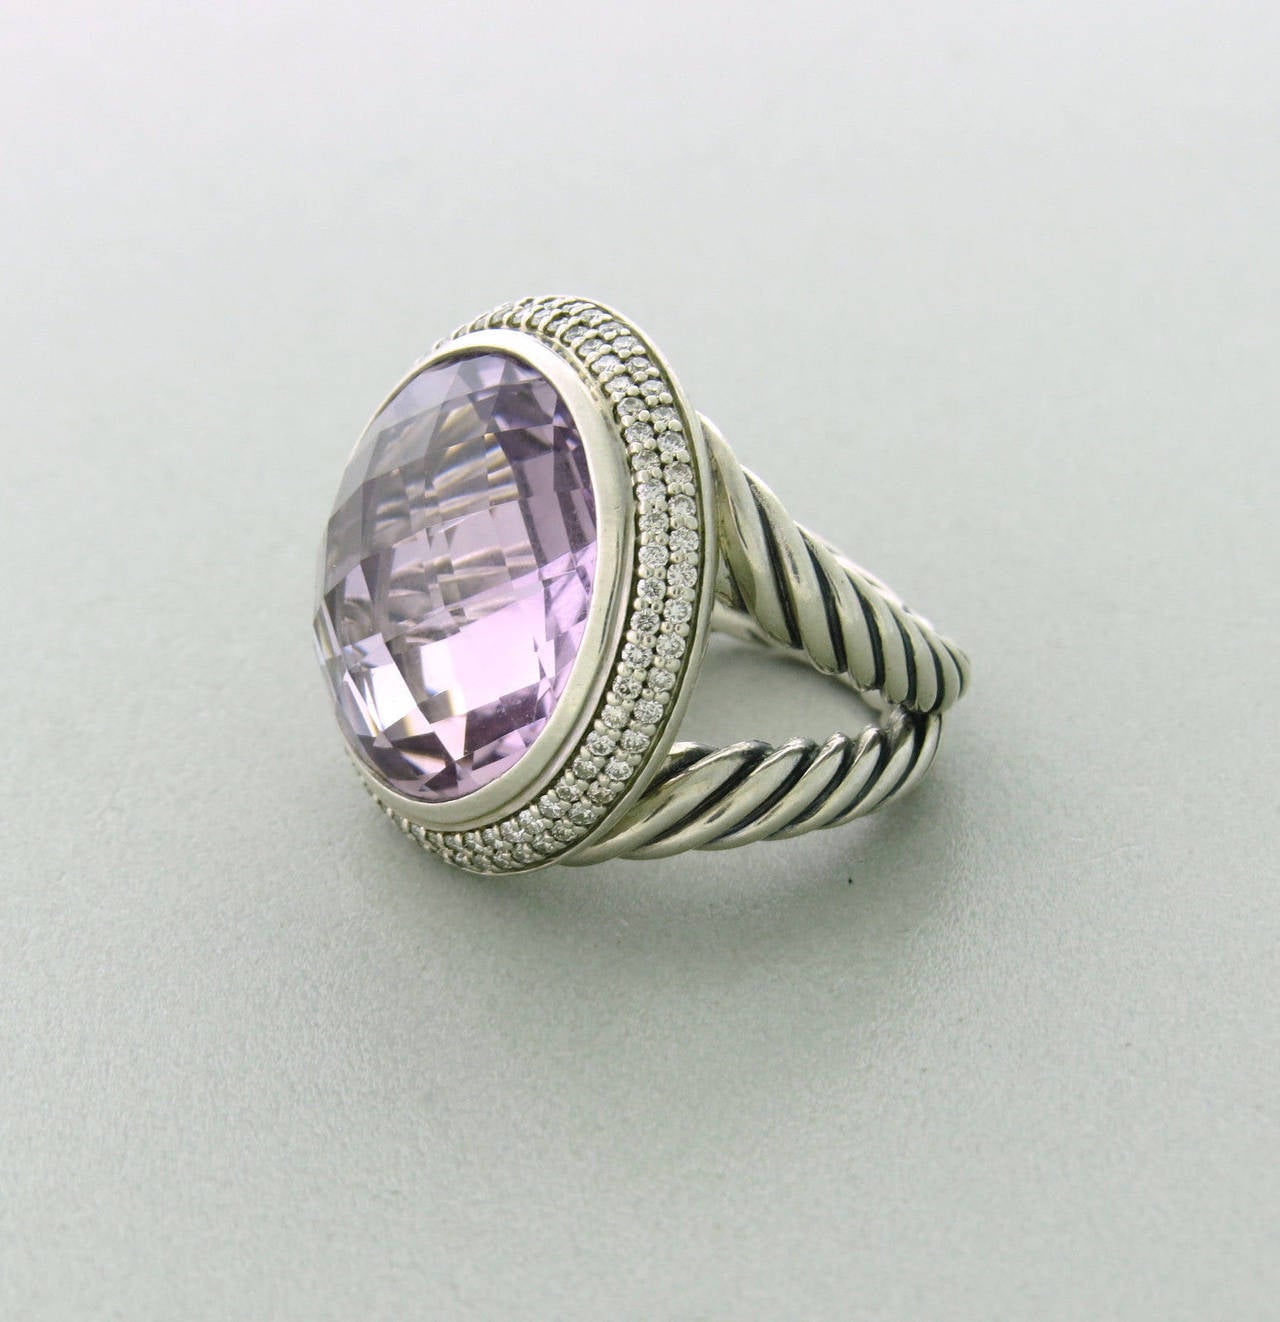 David Yurman Cerise ring featuring 17mm round amethyst surrounded by 0.70ctw in diamonds set in sterling silver.  The ring is a size 6.